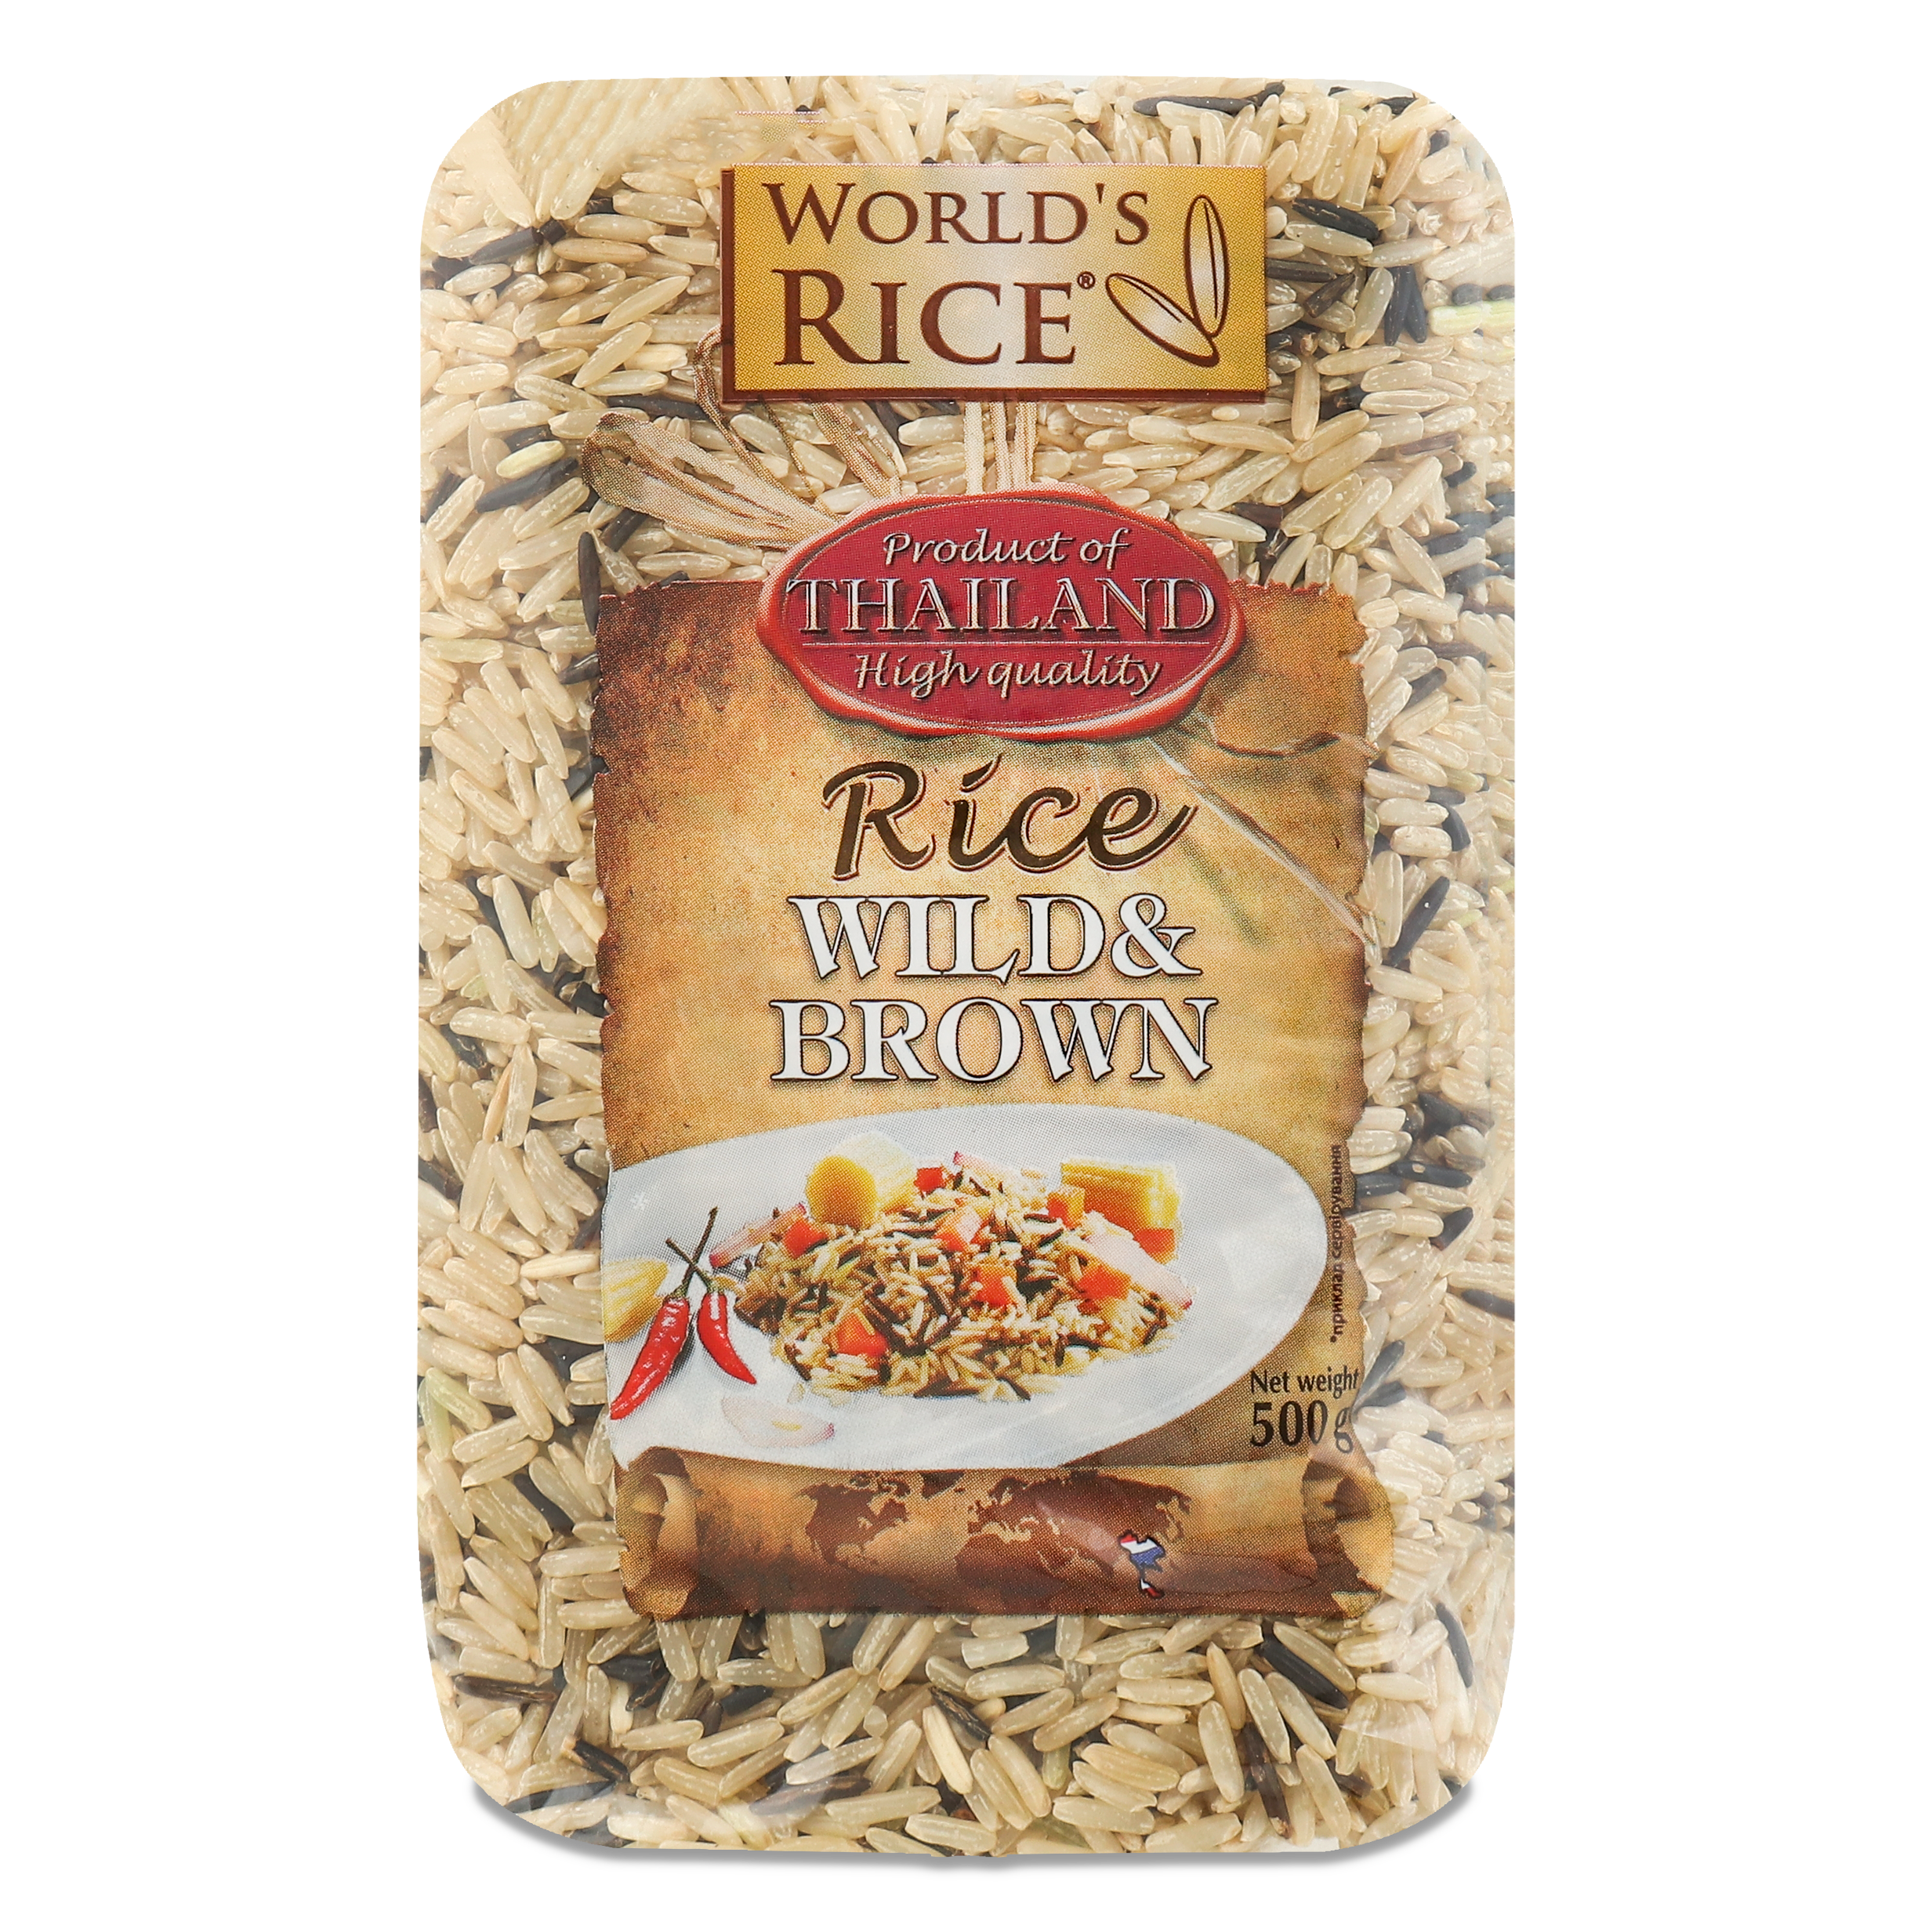 World’s Rice rice mix of unpolished long-grain and wild 500g